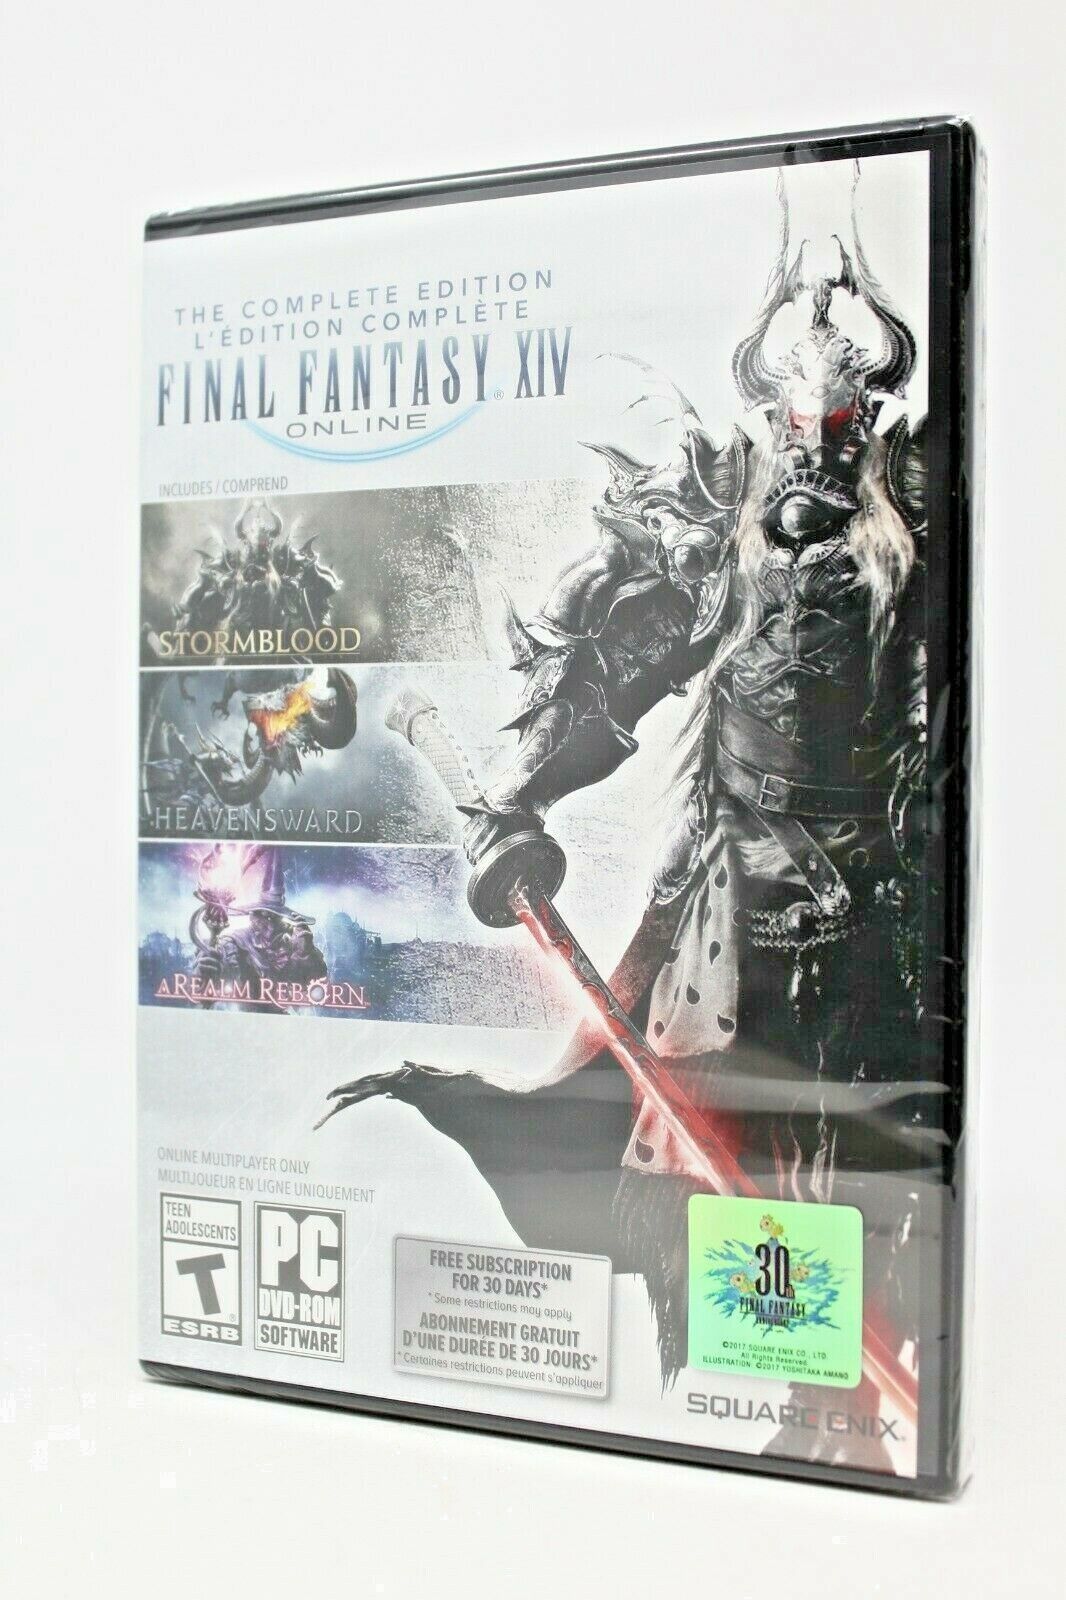 Final Fantasy XIV Online: Complete Edition - PC - NEW - Sealed